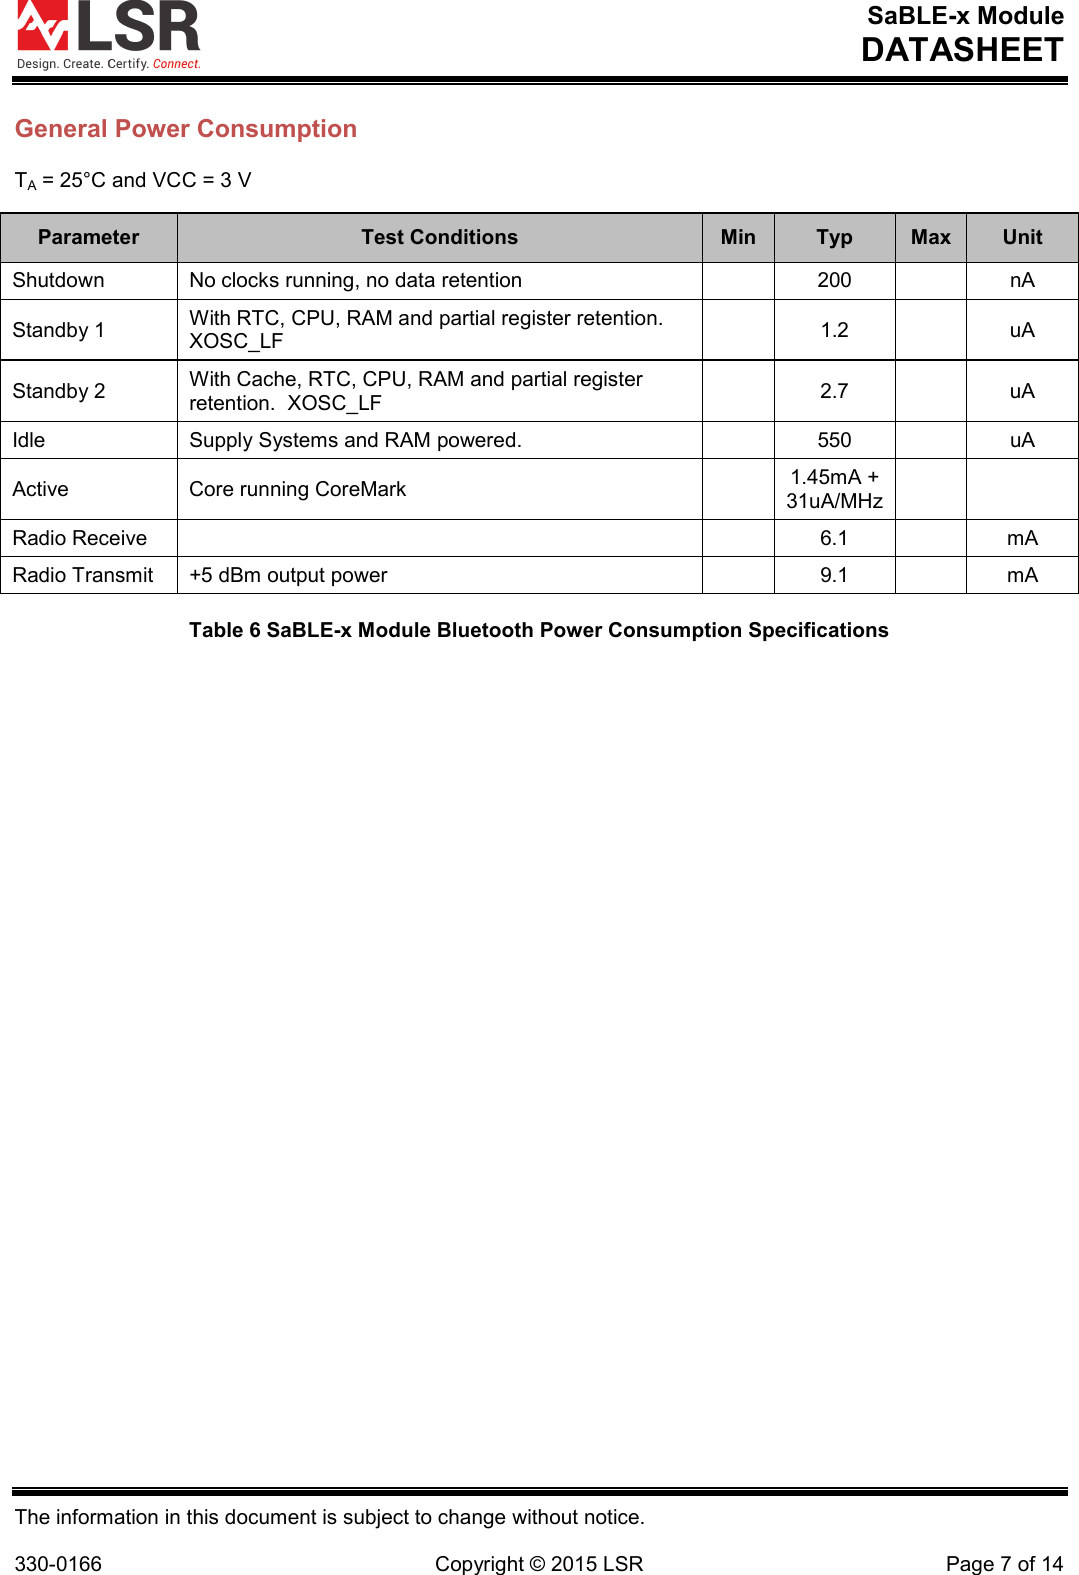 SaBLE-x Module DATASHEET  The information in this document is subject to change without notice.  330-0166 Copyright © 2015 LSR Page 7 of 14 General Power Consumption TA = 25°C and VCC = 3 V Parameter Test Conditions Min Typ Max Unit Shutdown No clocks running, no data retention  200  nA Standby 1 With RTC, CPU, RAM and partial register retention.  XOSC_LF   1.2    uA Standby 2 With Cache, RTC, CPU, RAM and partial register retention.  XOSC_LF  2.7    uA Idle Supply Systems and RAM powered.  550  uA Active Core running CoreMark   1.45mA + 31uA/MHz    Radio Receive   6.1  mA Radio Transmit +5 dBm output power  9.1  mA  Table 6 SaBLE-x Module Bluetooth Power Consumption Specifications   